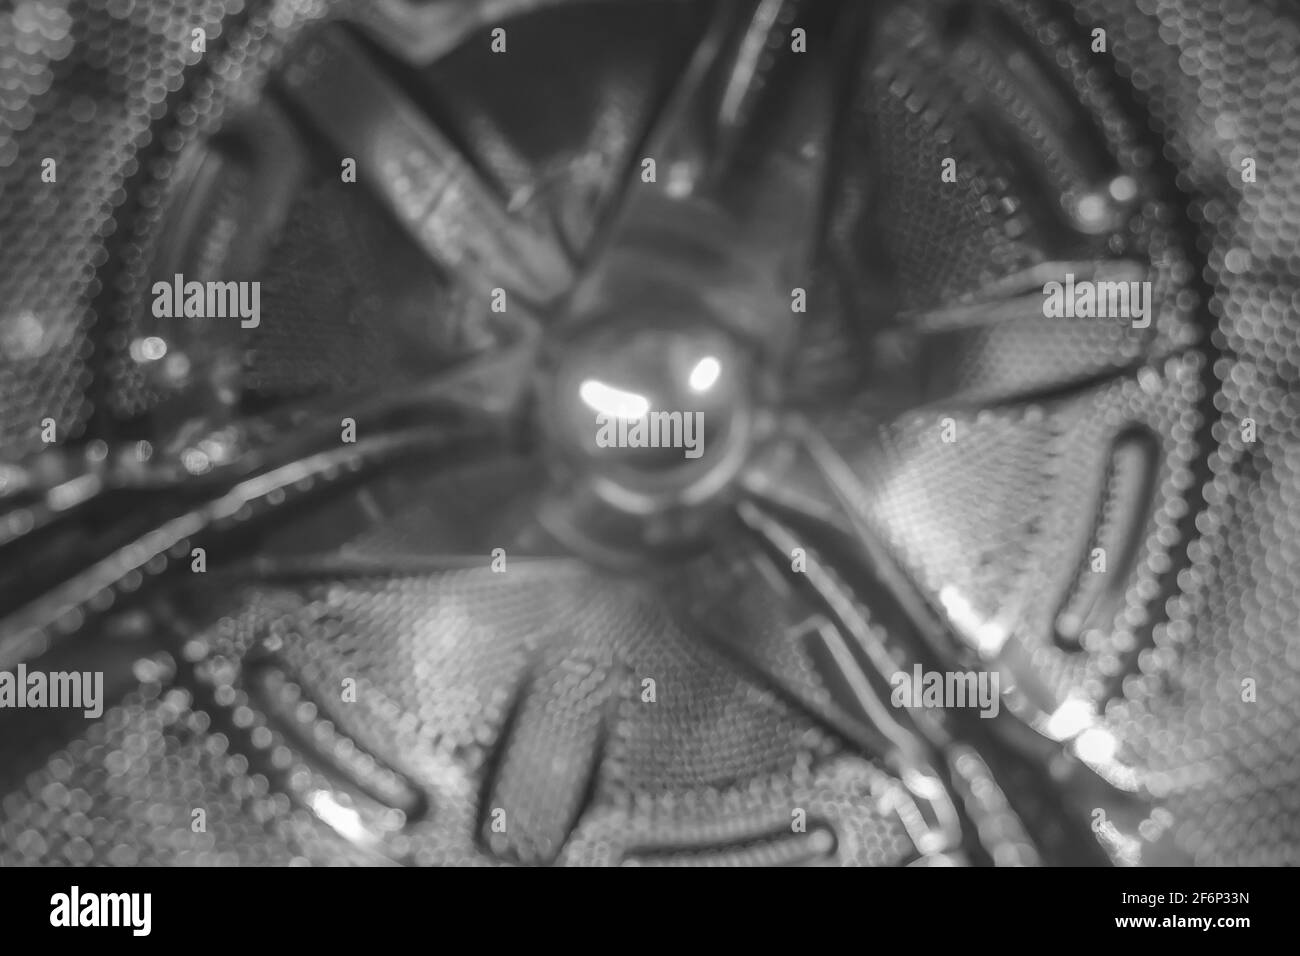 Washing machine drum silver metal color, blurred background close-up. Stock Photo